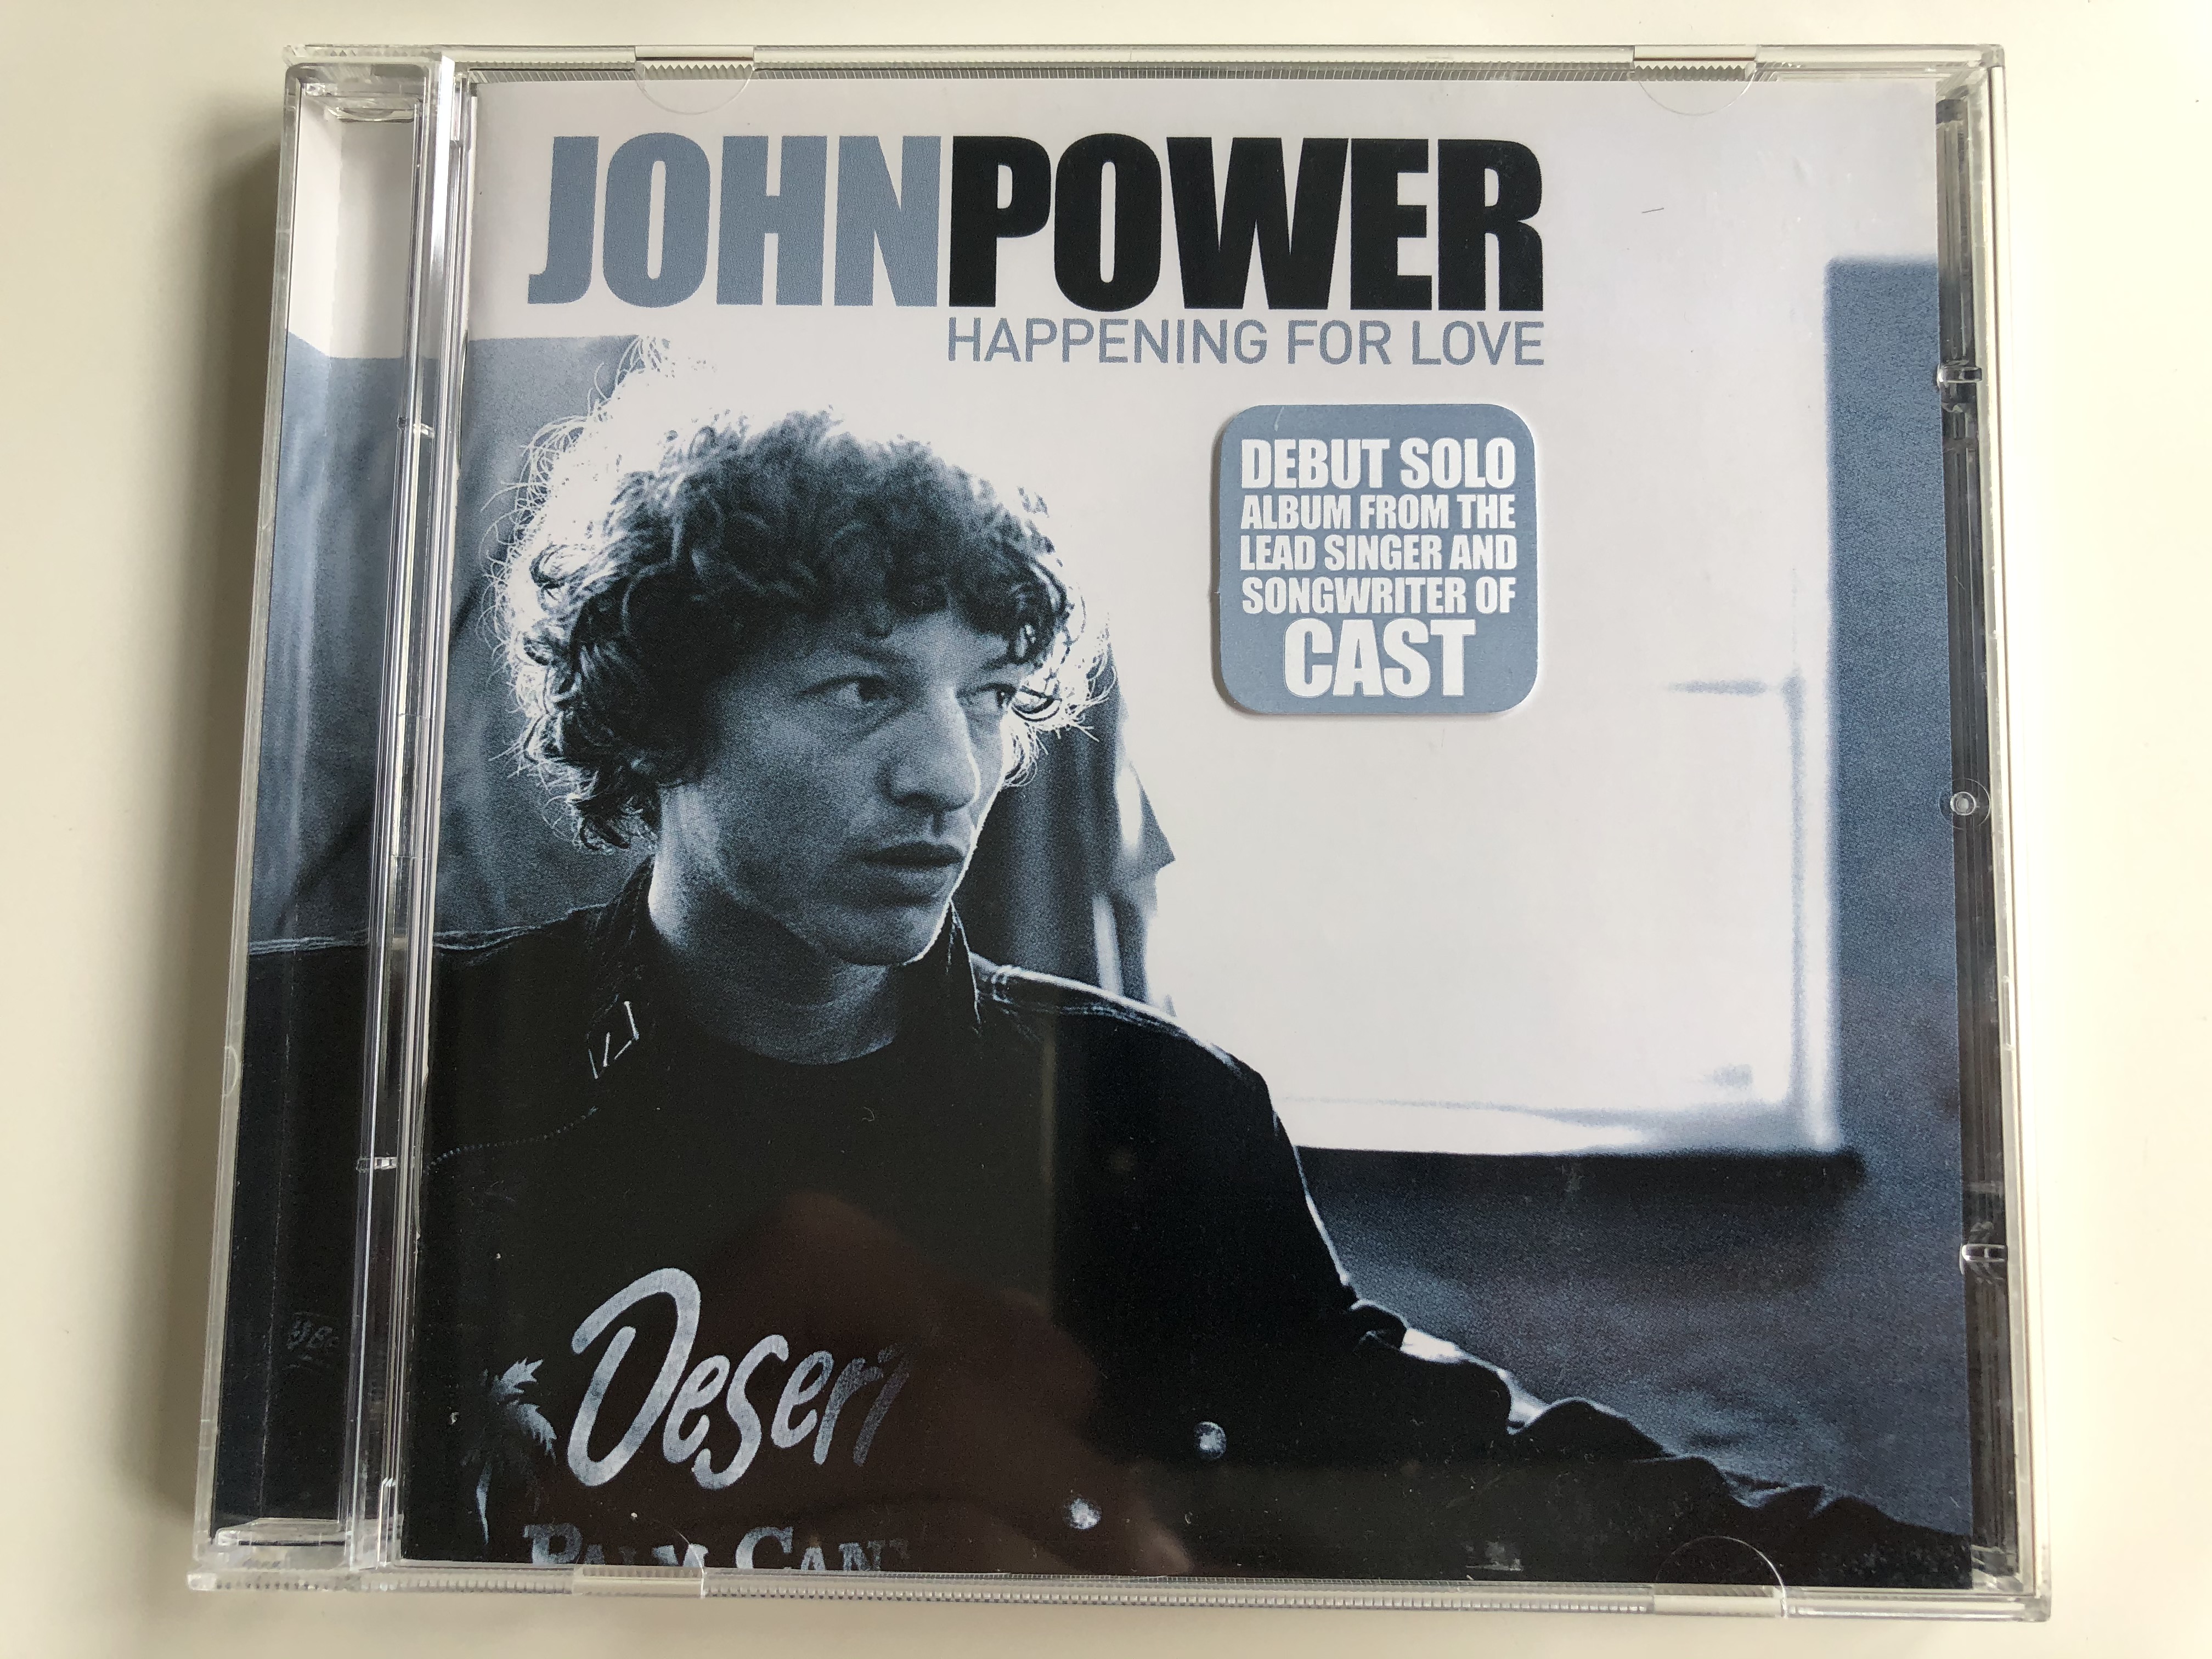 john-power-happening-for-love-debut-solo-album-from-the-lead-singer-and-songwriter-of-cast-eagle-records-audio-cd-2003-eagcd249-1-.jpg